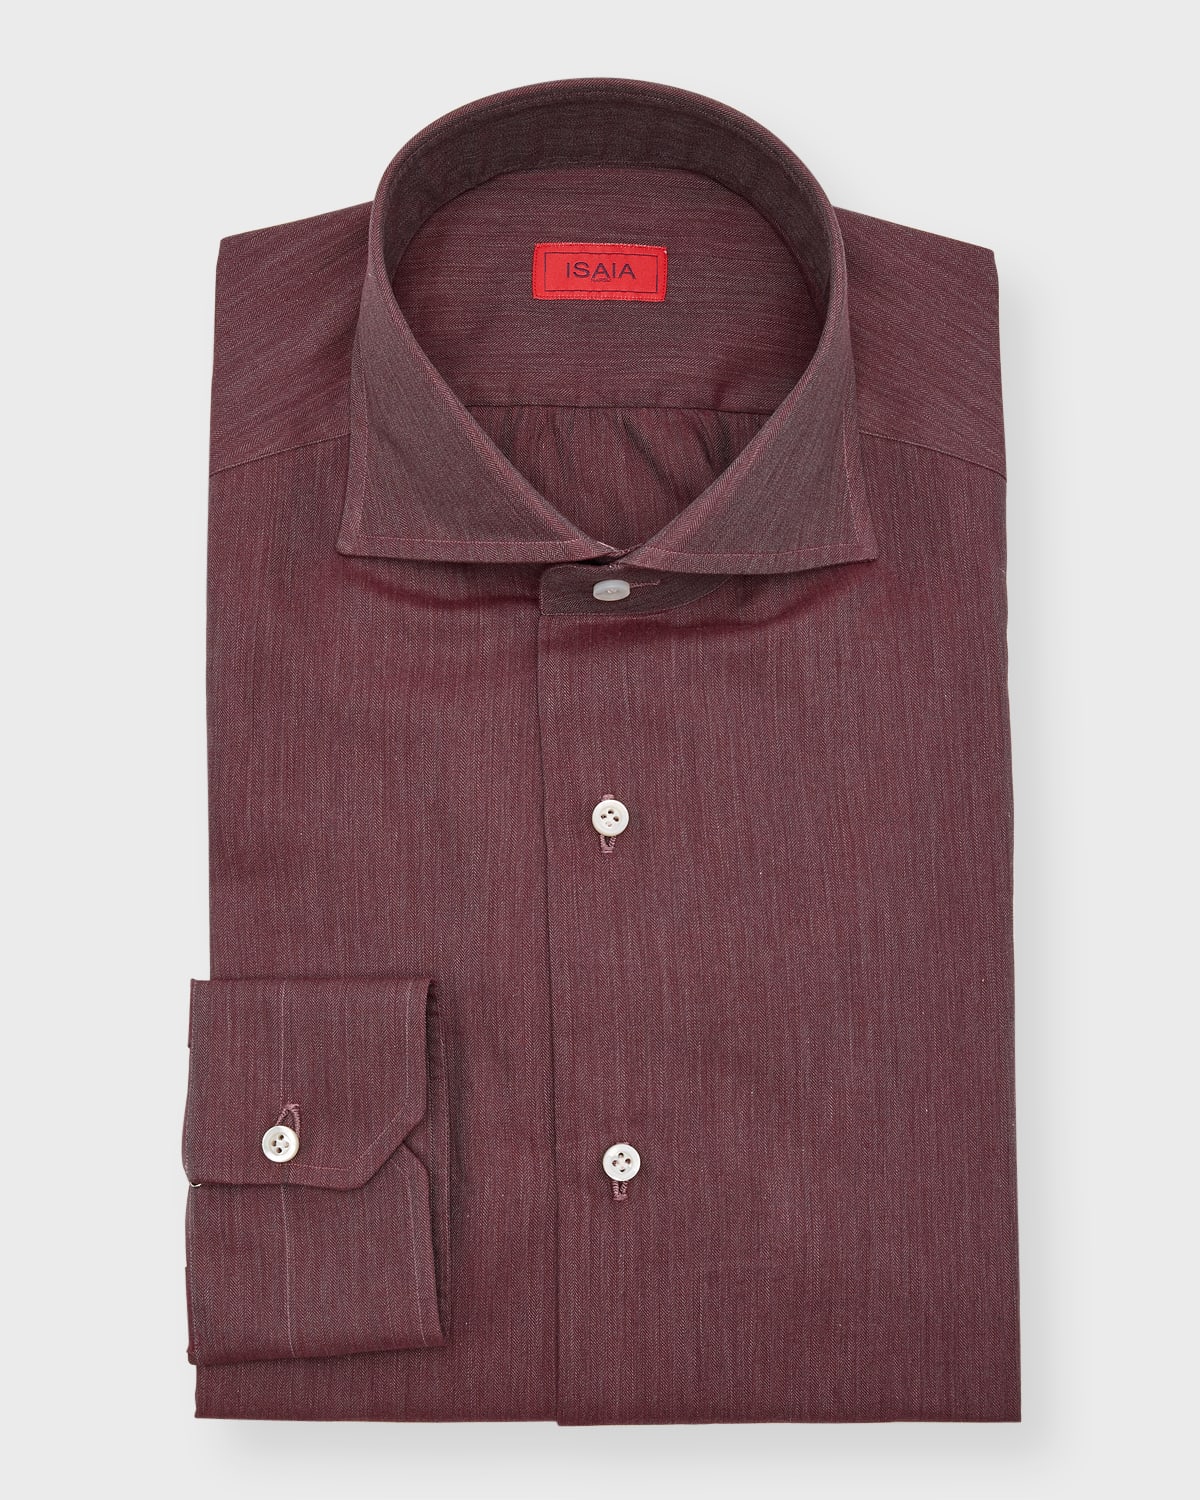 Isaia Men's Solid Chambray Sport Shirt In Burgundy